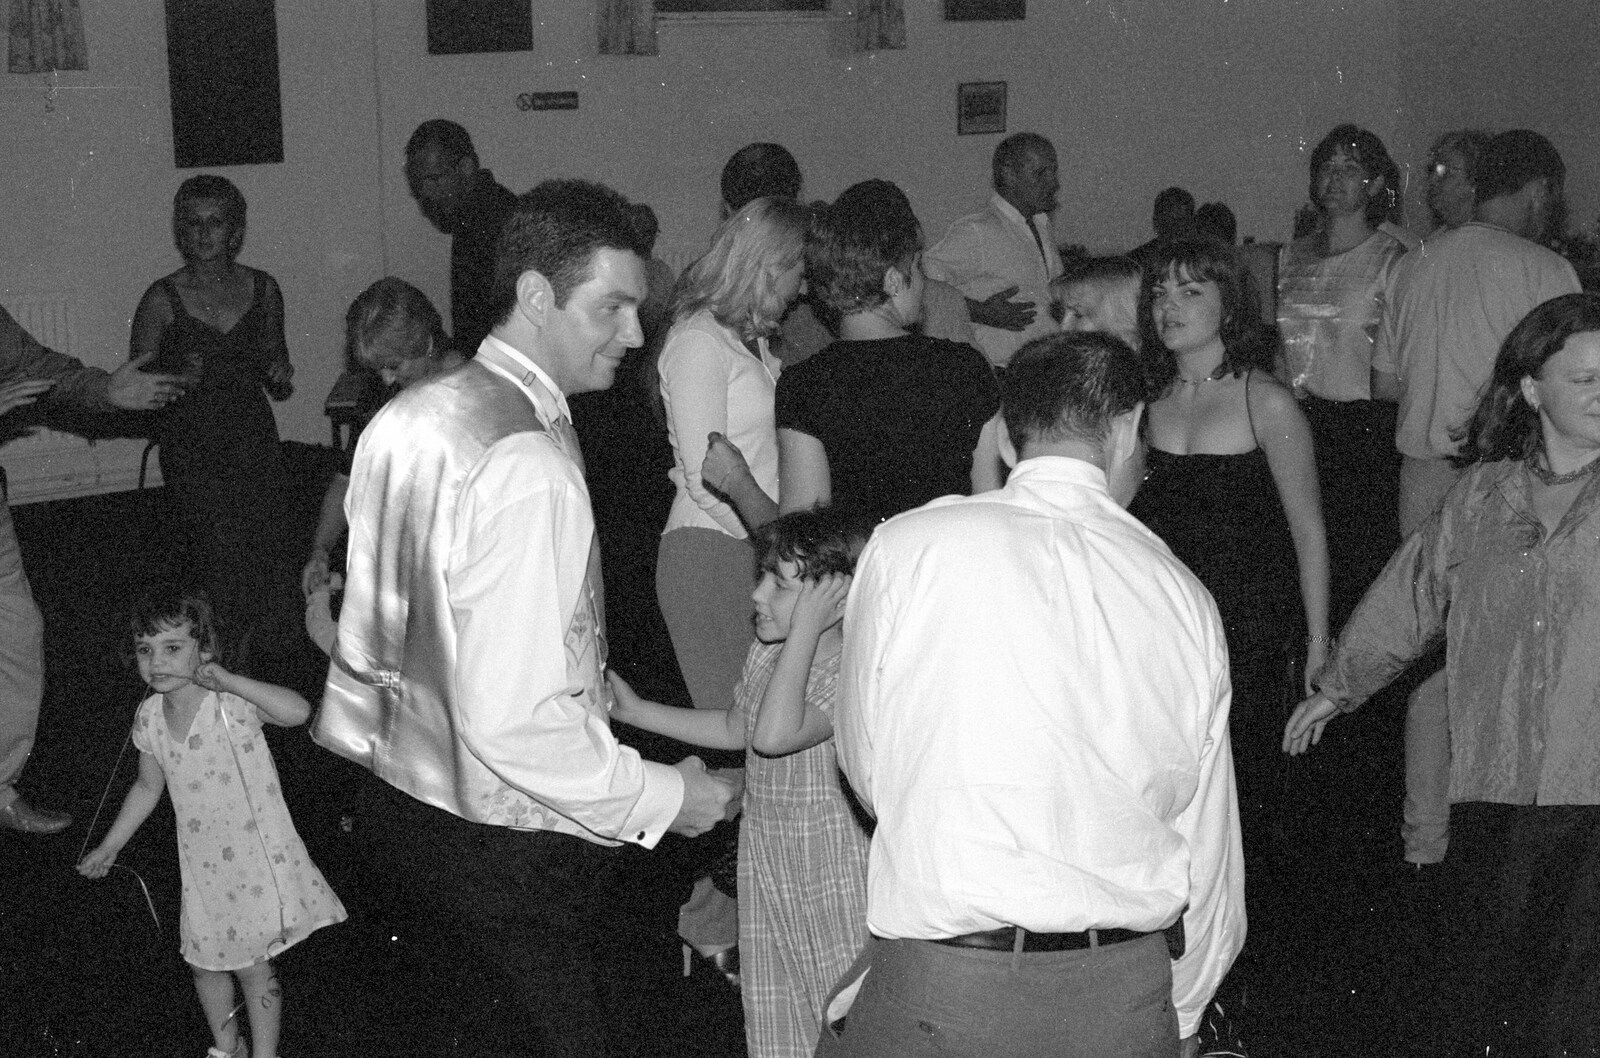 Wedding bopping from Sean and Michelle's Wedding, Bashley FC, New Milton - 12th August 2000